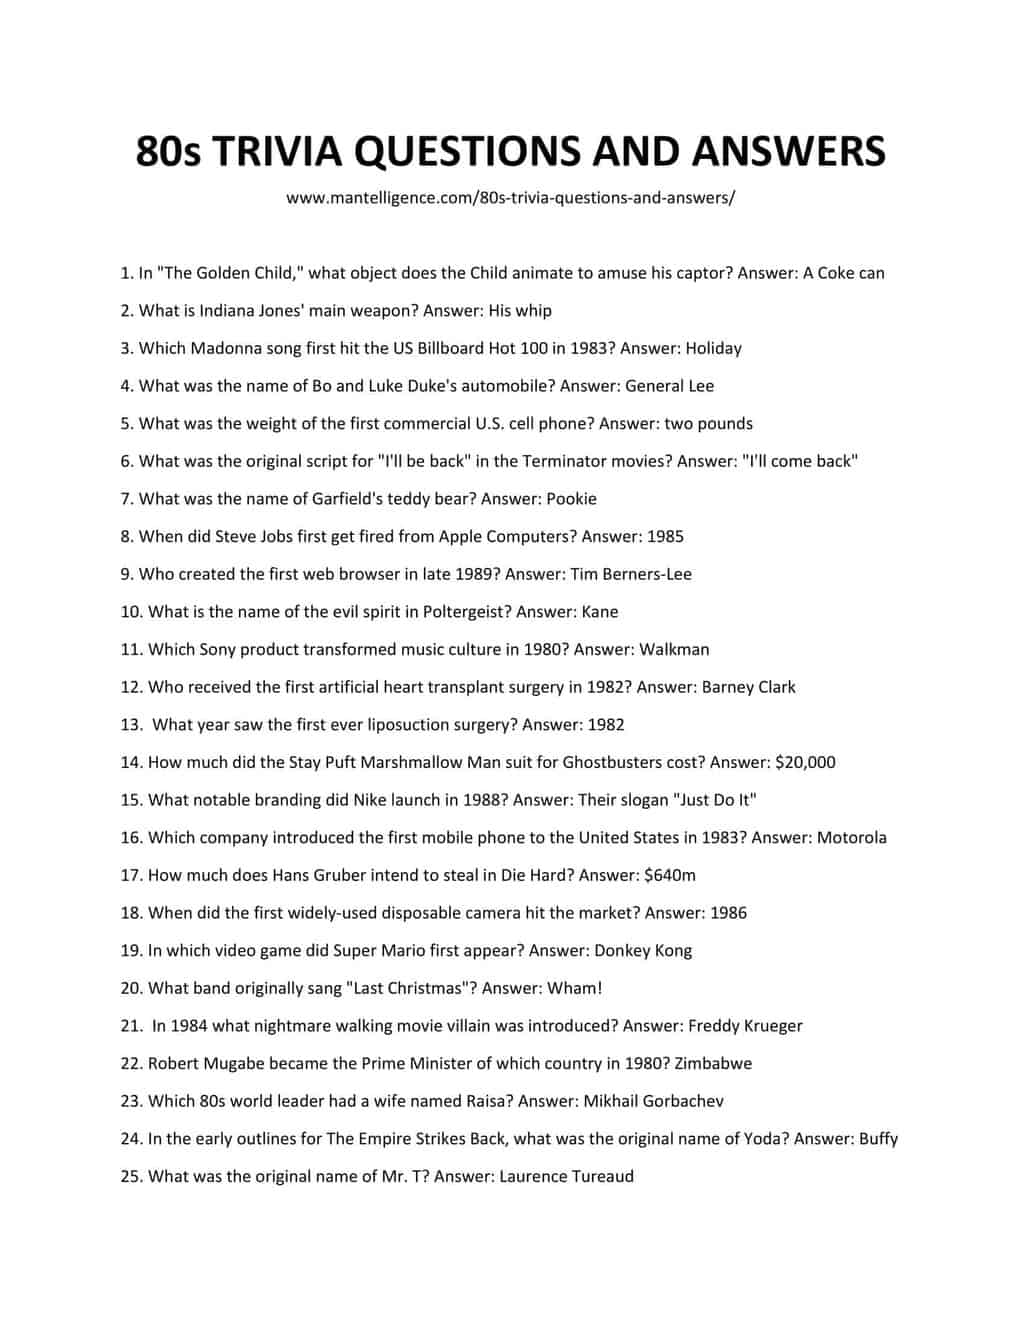 82 Best 80s Trivia Questions and Answers - This is the ...